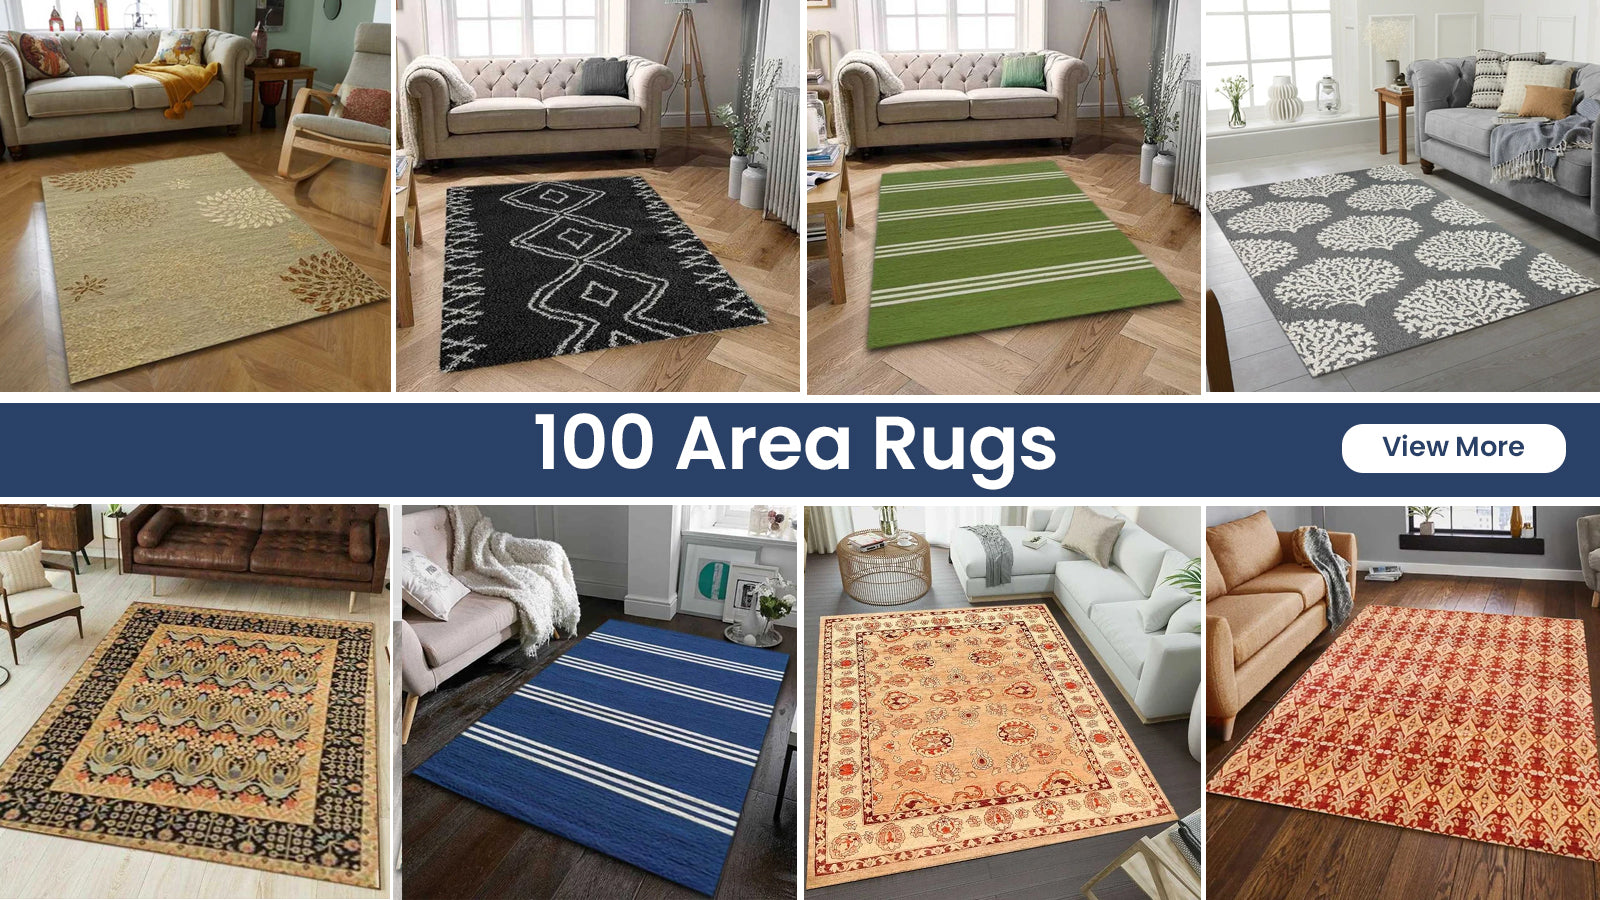 How to Lay an Area Rug Over Carpet